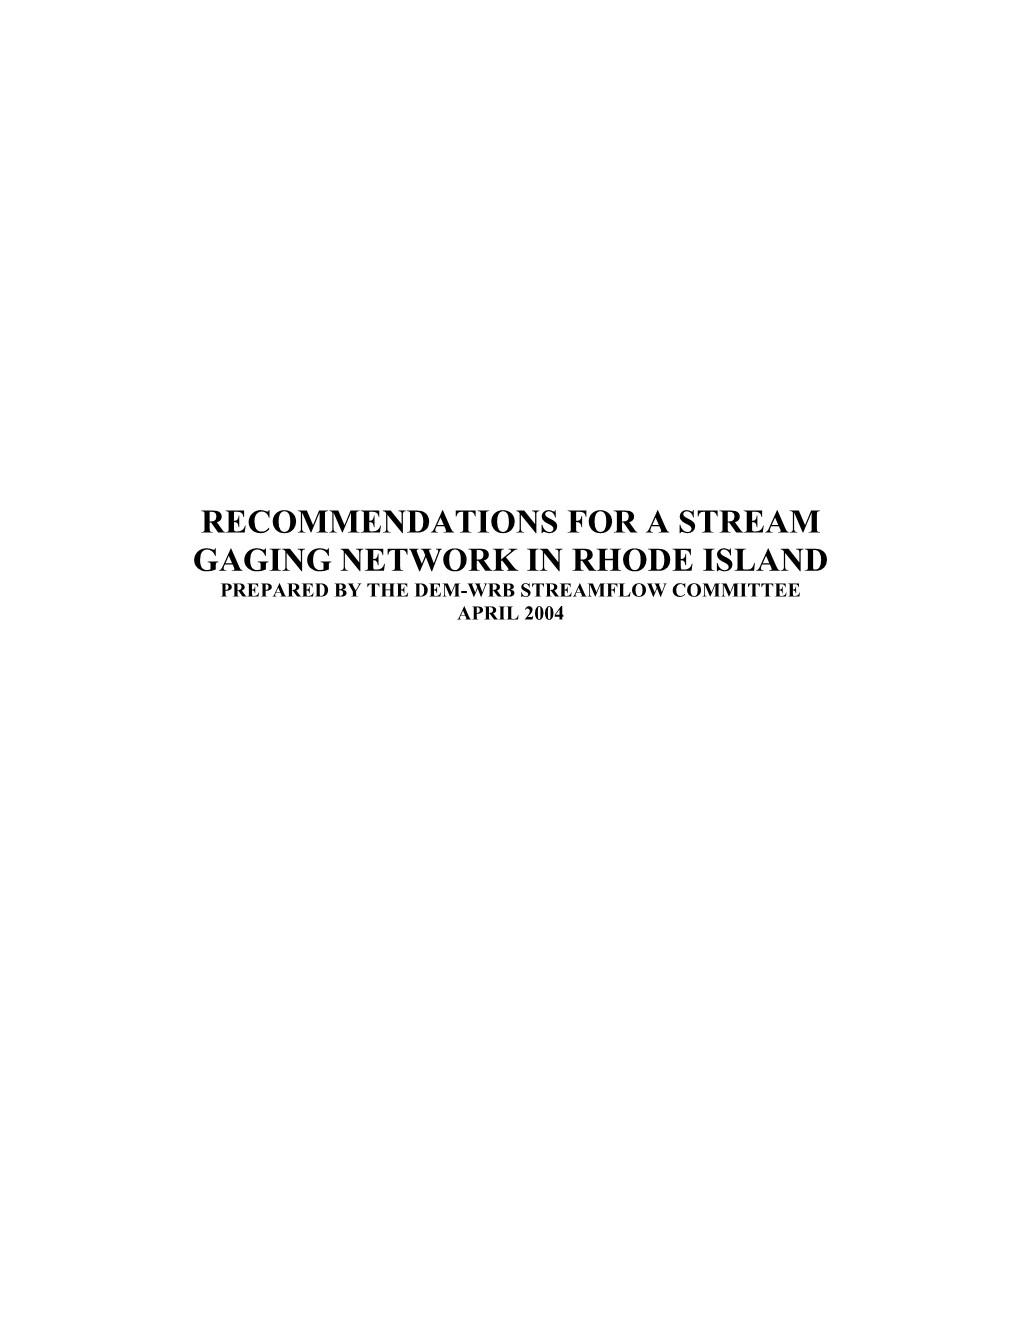 RECOMMENDATIONS for a STREAM GAGING NETWORK in RHODE ISLAND PREPARED by the DEM-WRB STREAMFLOW COMMITTEE APRIL 2004 Streamflow Committee Members